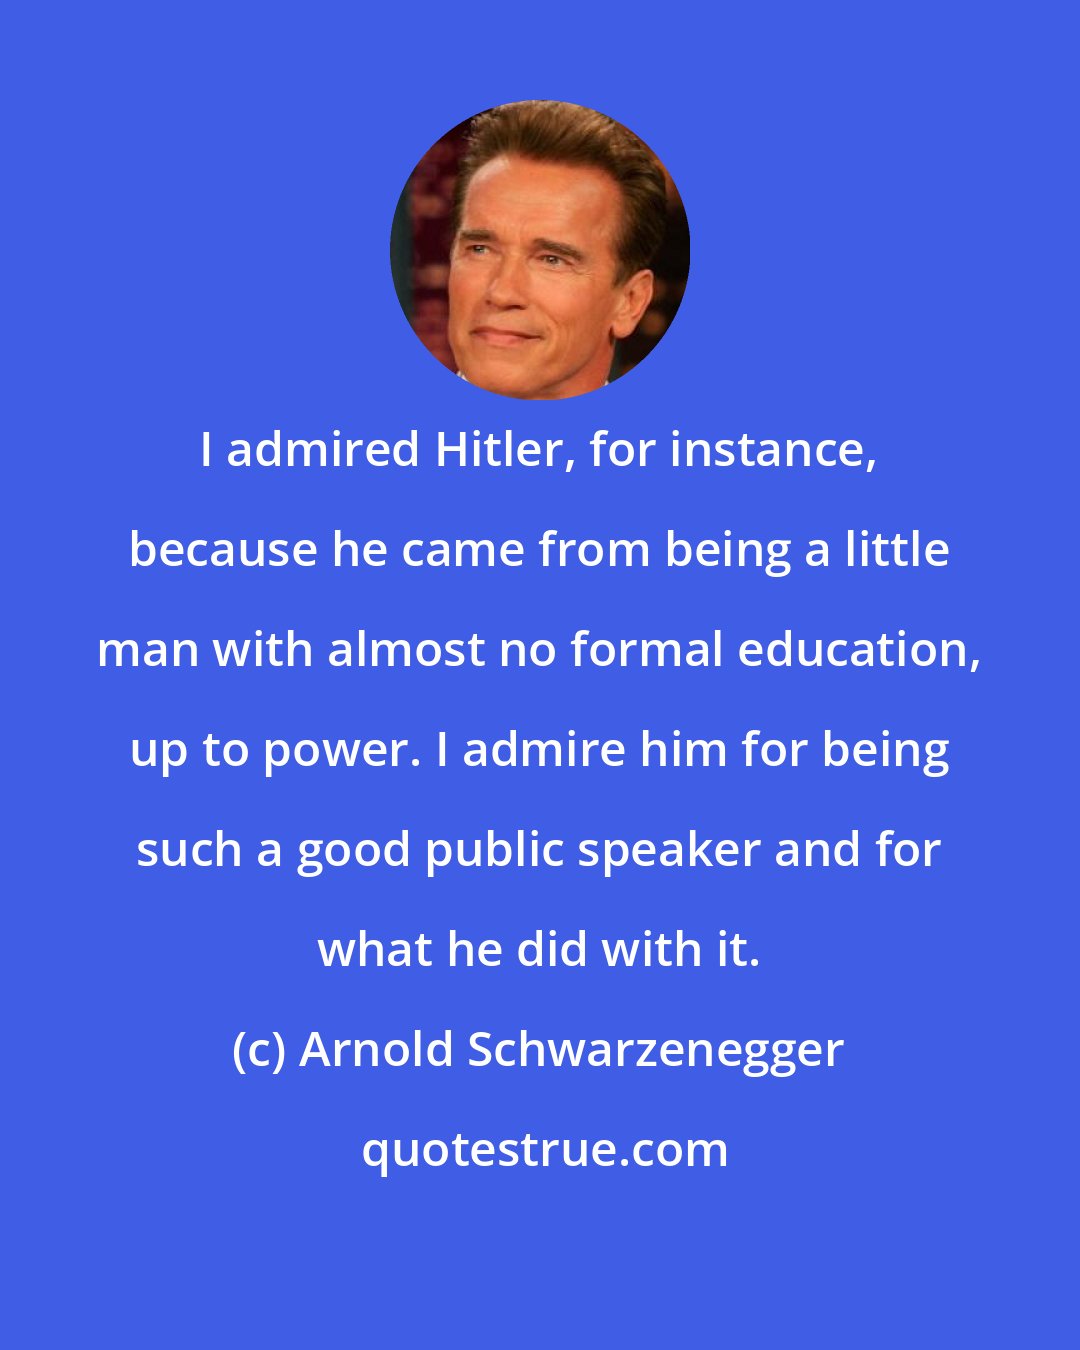 Arnold Schwarzenegger: I admired Hitler, for instance, because he came from being a little man with almost no formal education, up to power. I admire him for being such a good public speaker and for what he did with it.